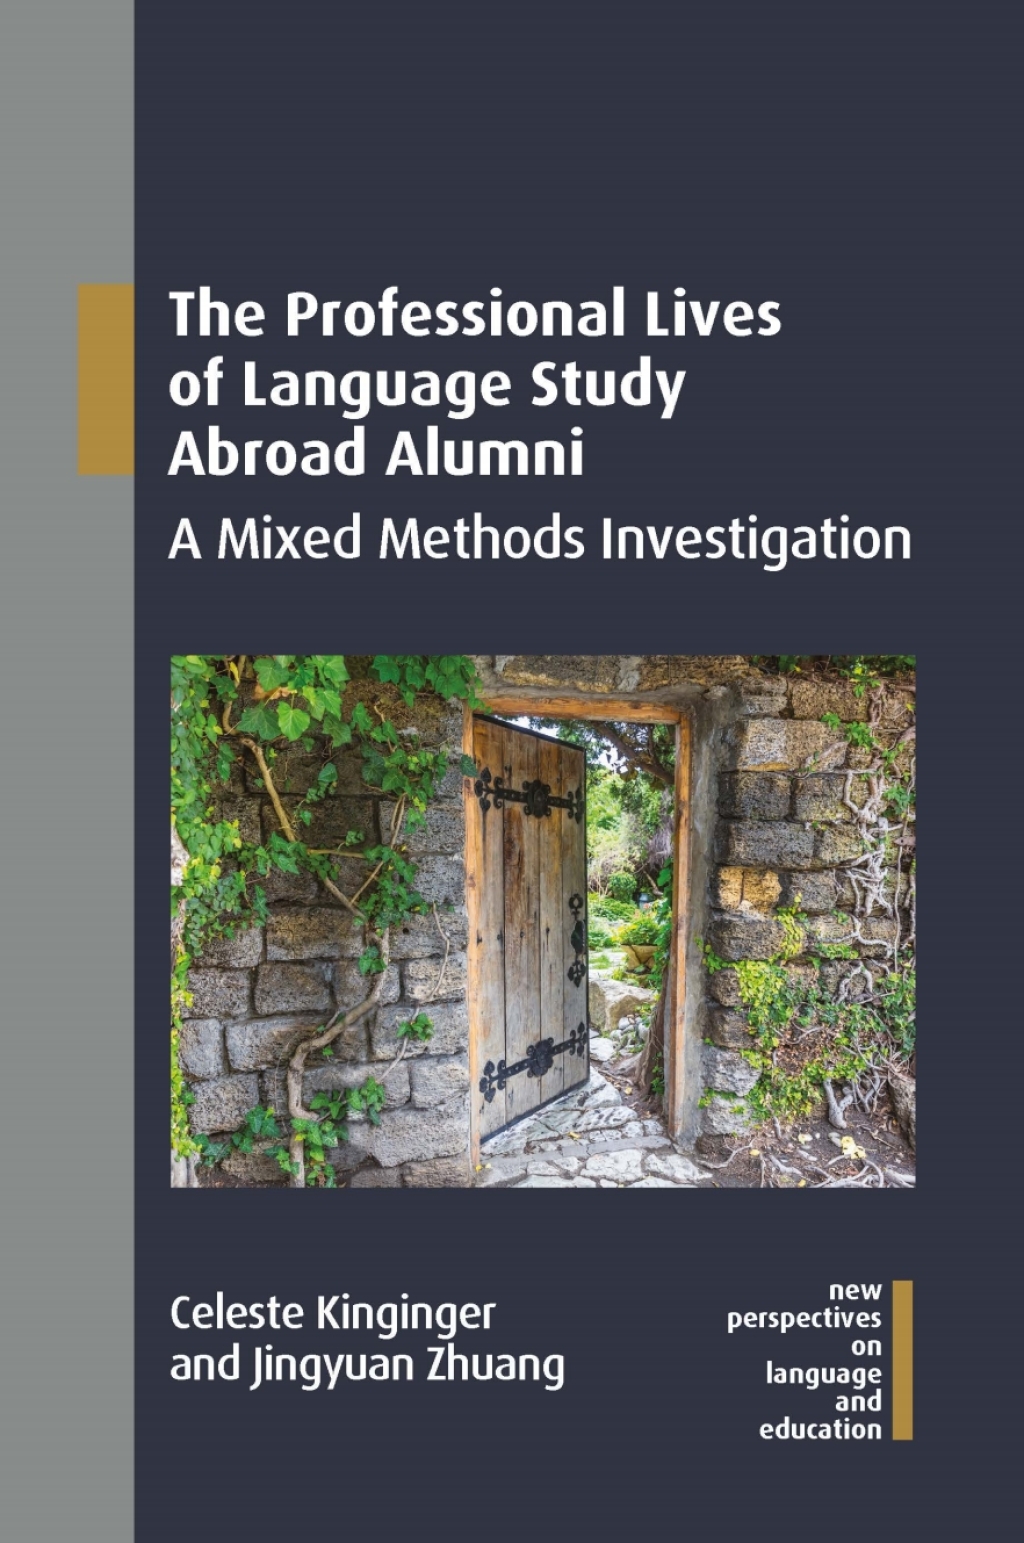 Page Fidelity The Professional Lives of Language Study Abroad Alumni; $35.00